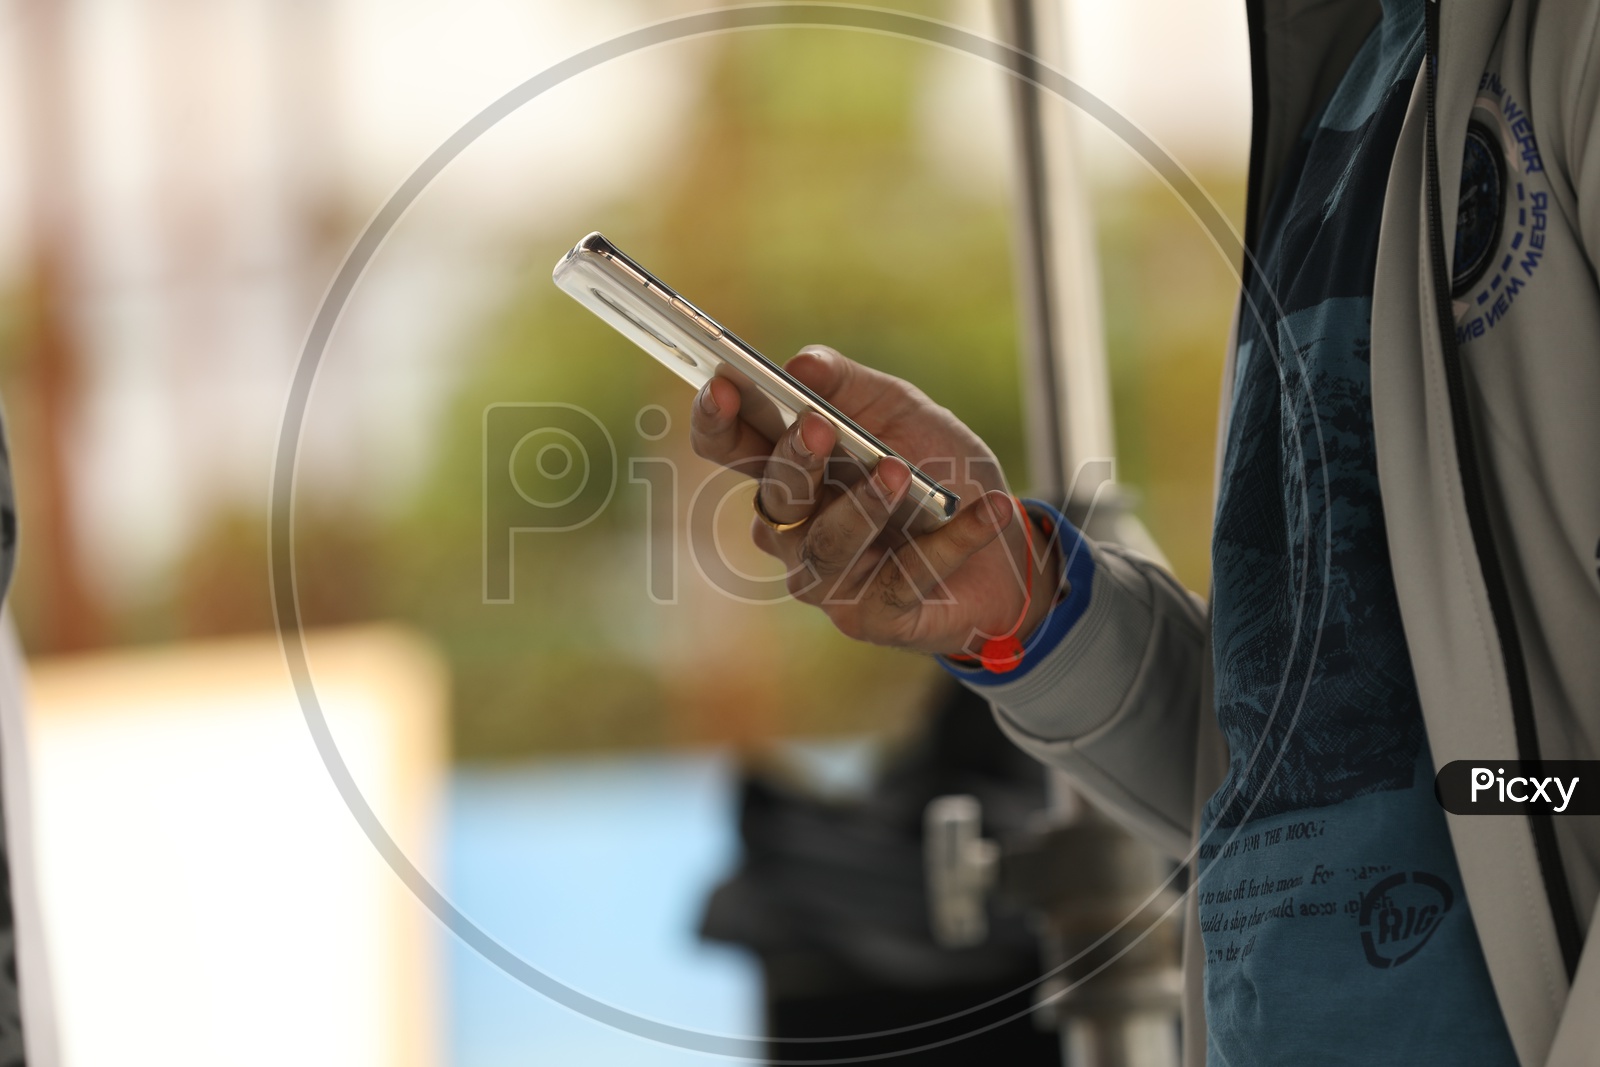 A Mobile Phone in the hands of a man